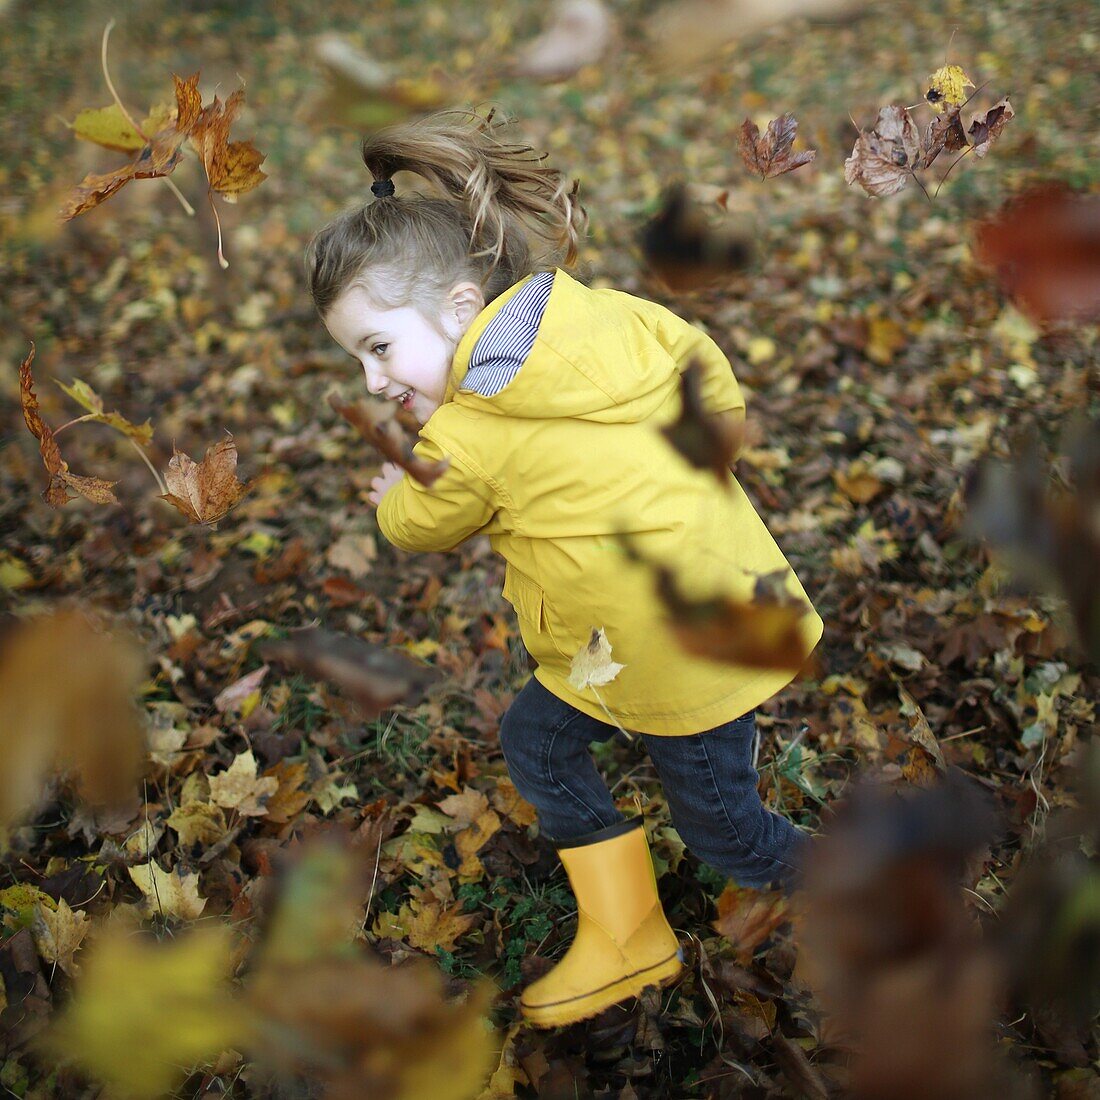 A little girl playing with dead leaves